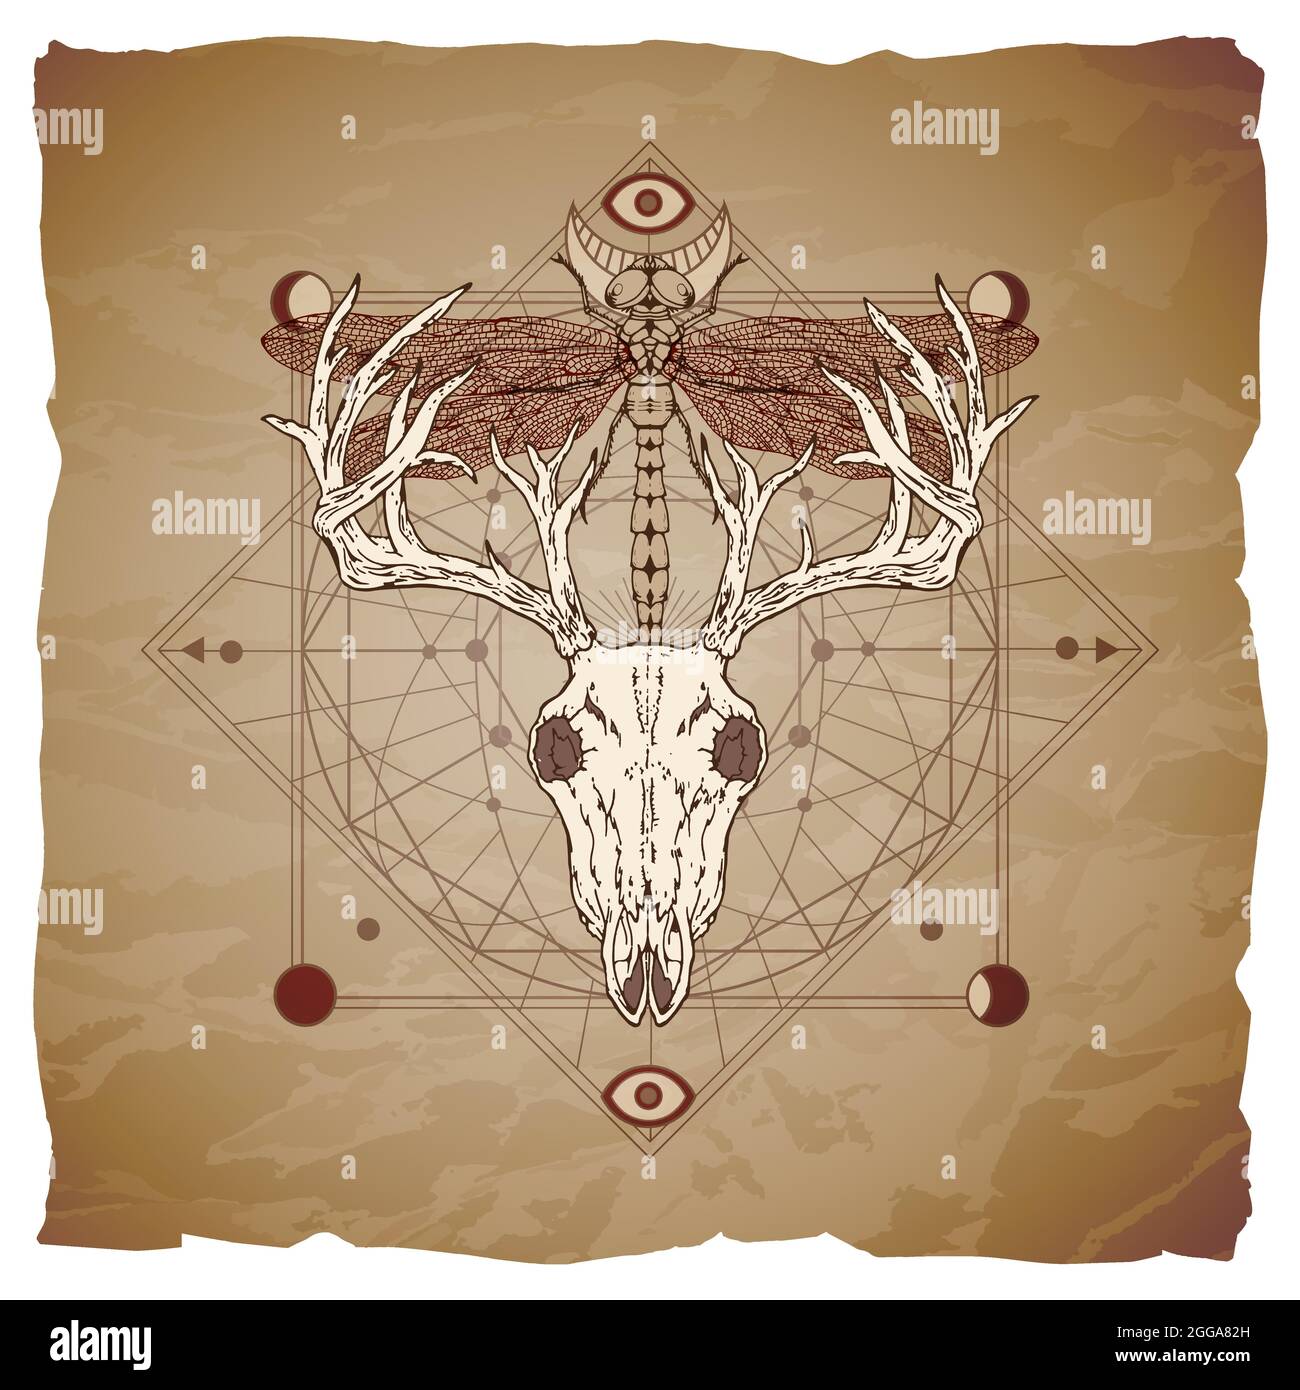 Vector illustration with hand drawn deer skull, dragonfly and Sacred geometric symbol on vintage paper background with torn edges. Stock Vector